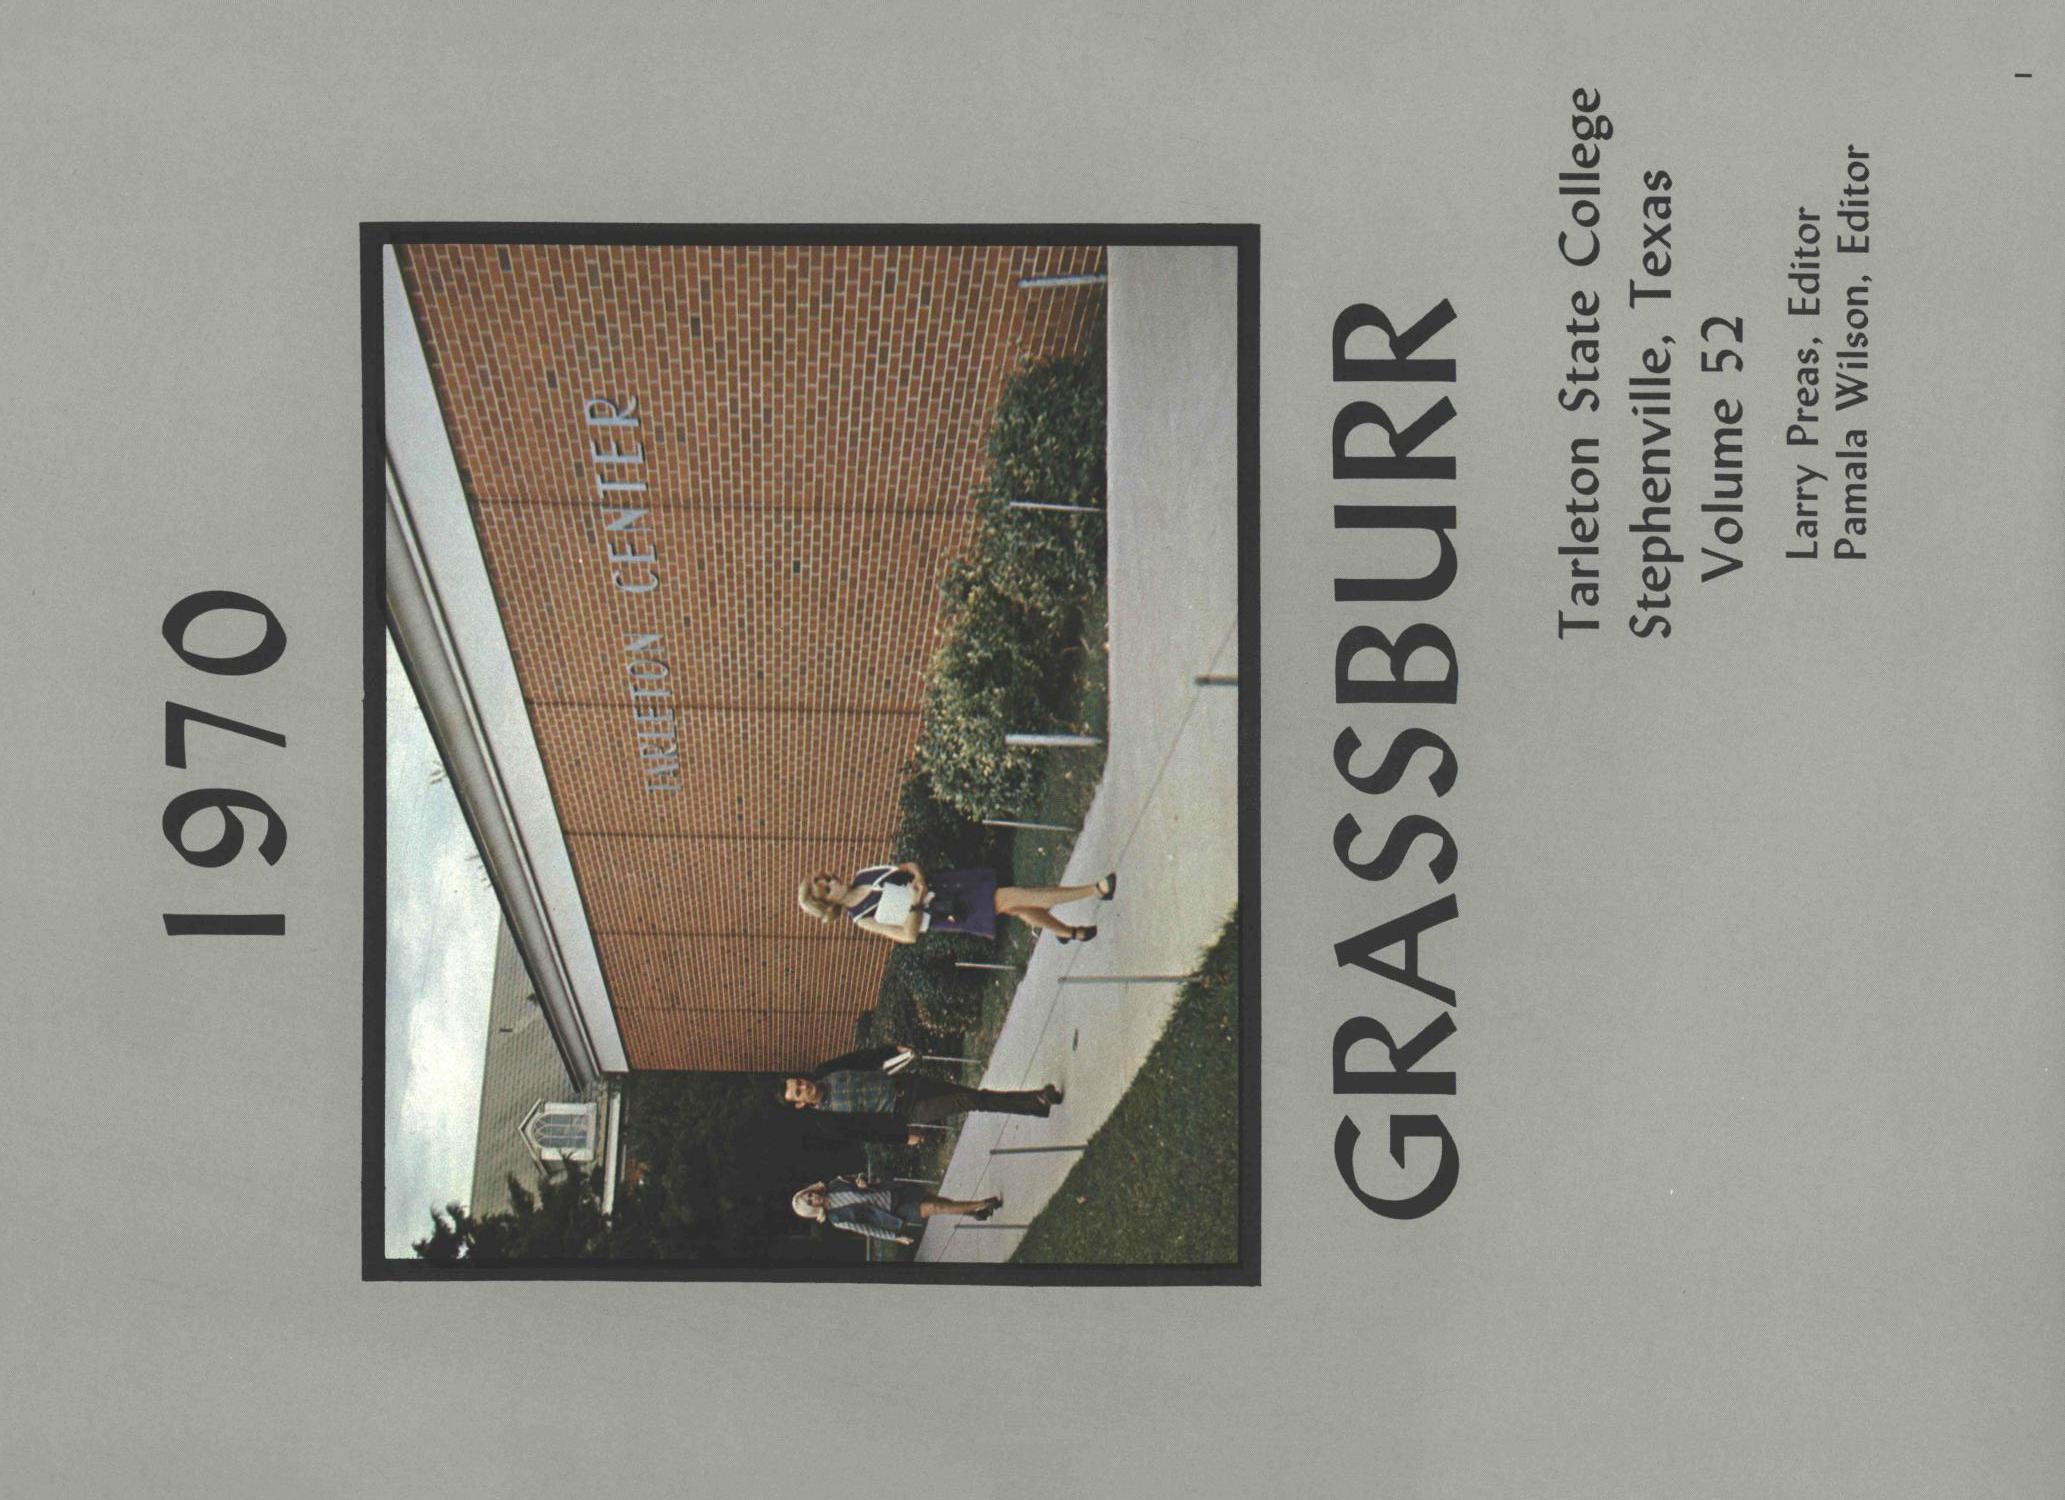 The Grassburr, Yearbook of Tarleton State College, 1970
                                                
                                                    1
                                                